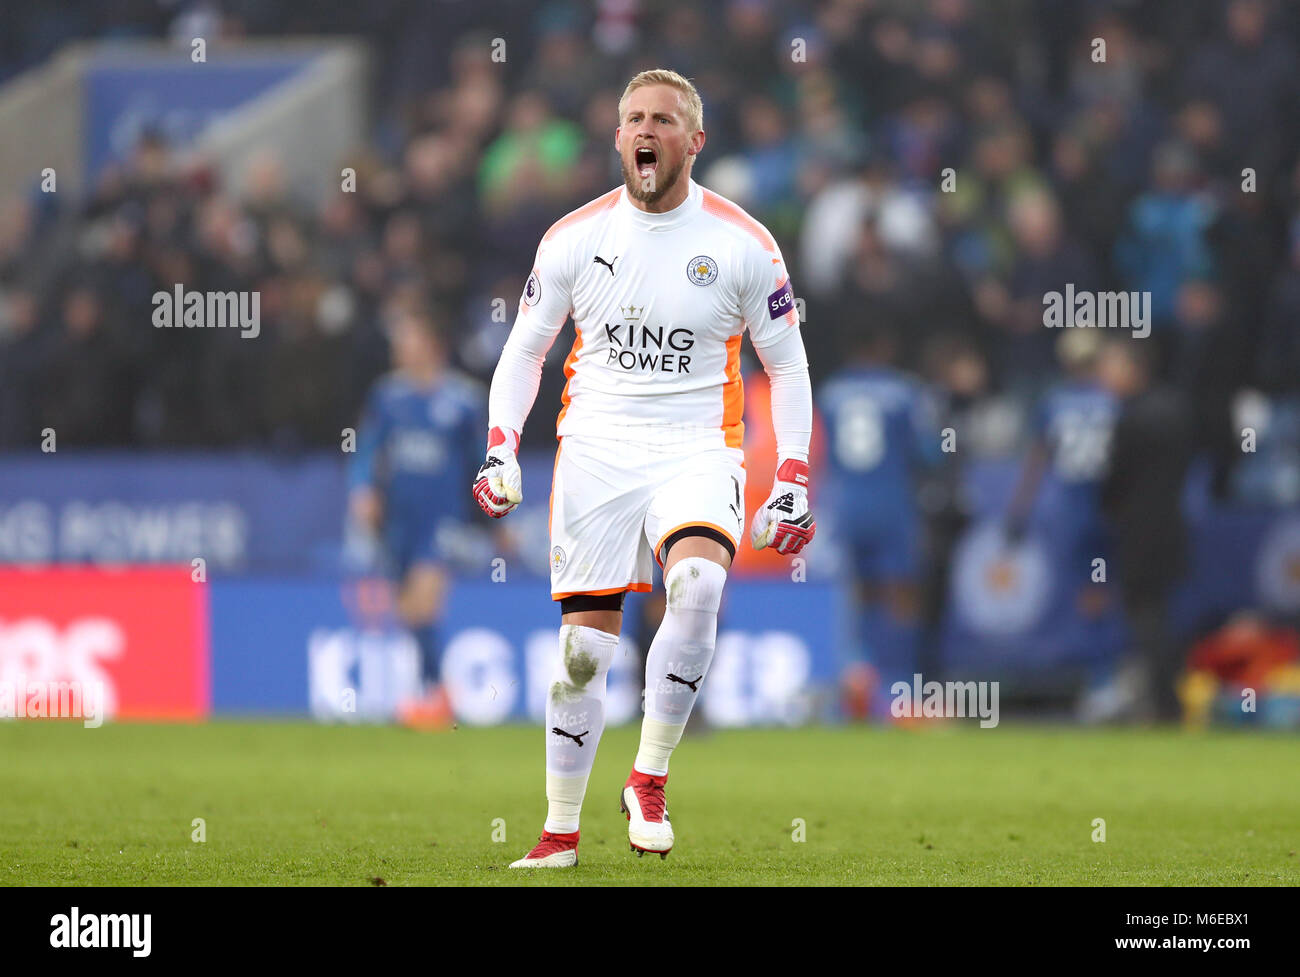 Leicester City goalkeeper Kasper Schmeichel celebrates after Riyad Mahrez (not pictured) scores his side's first goal of the game during the Premier League match at the King Power Stadium, Leicester. Stock Photo